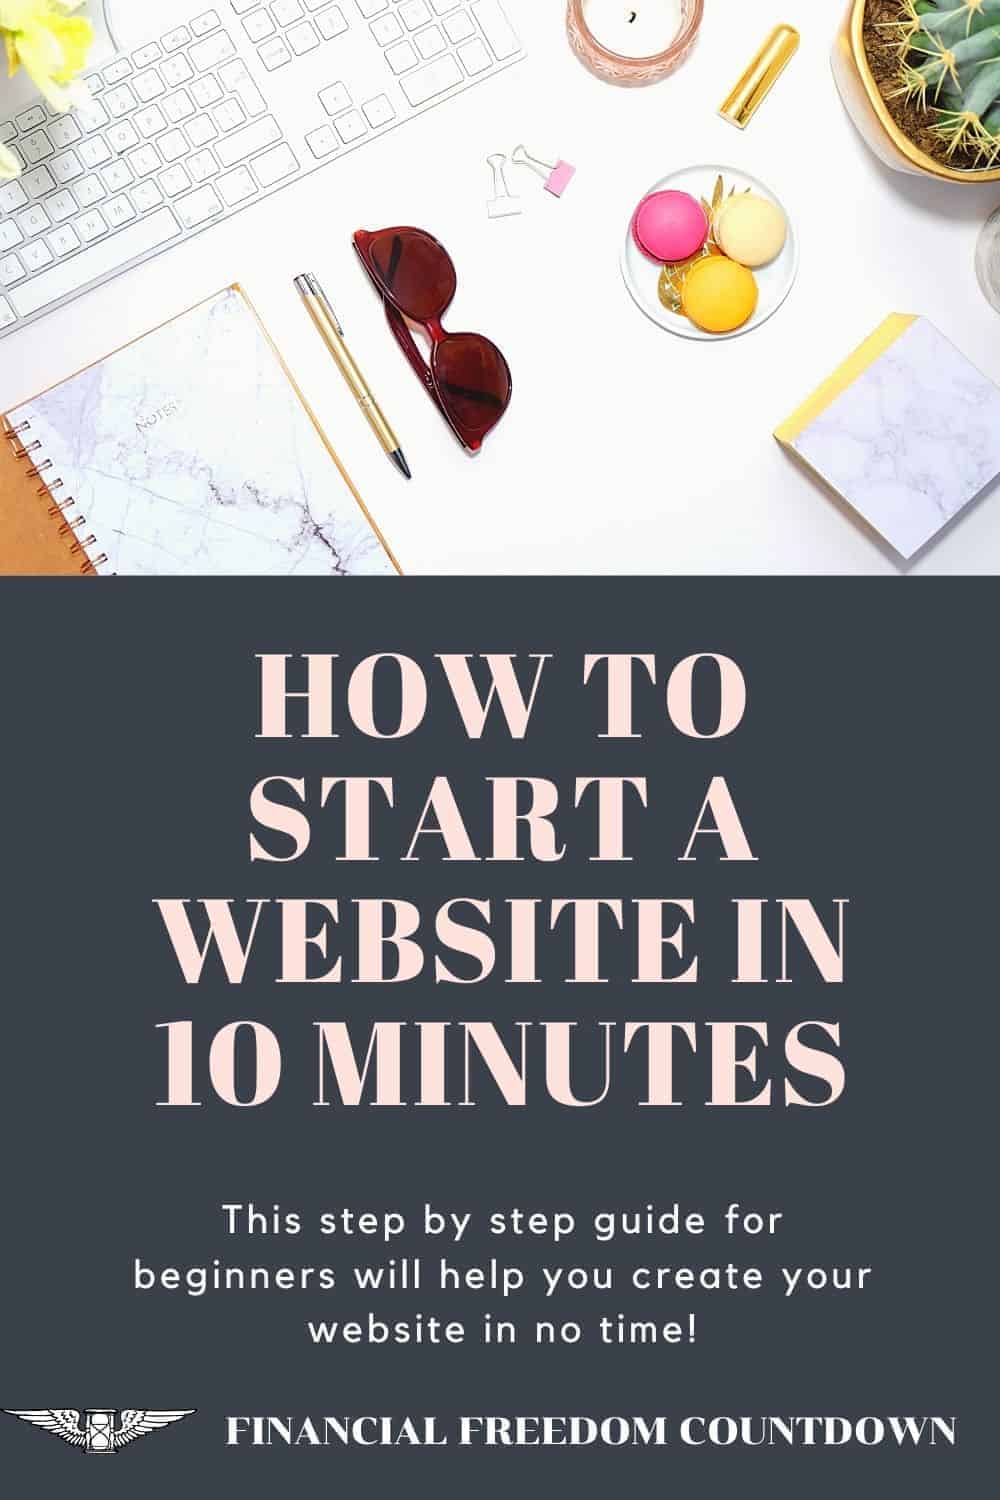 How To Start A Website or a Blog